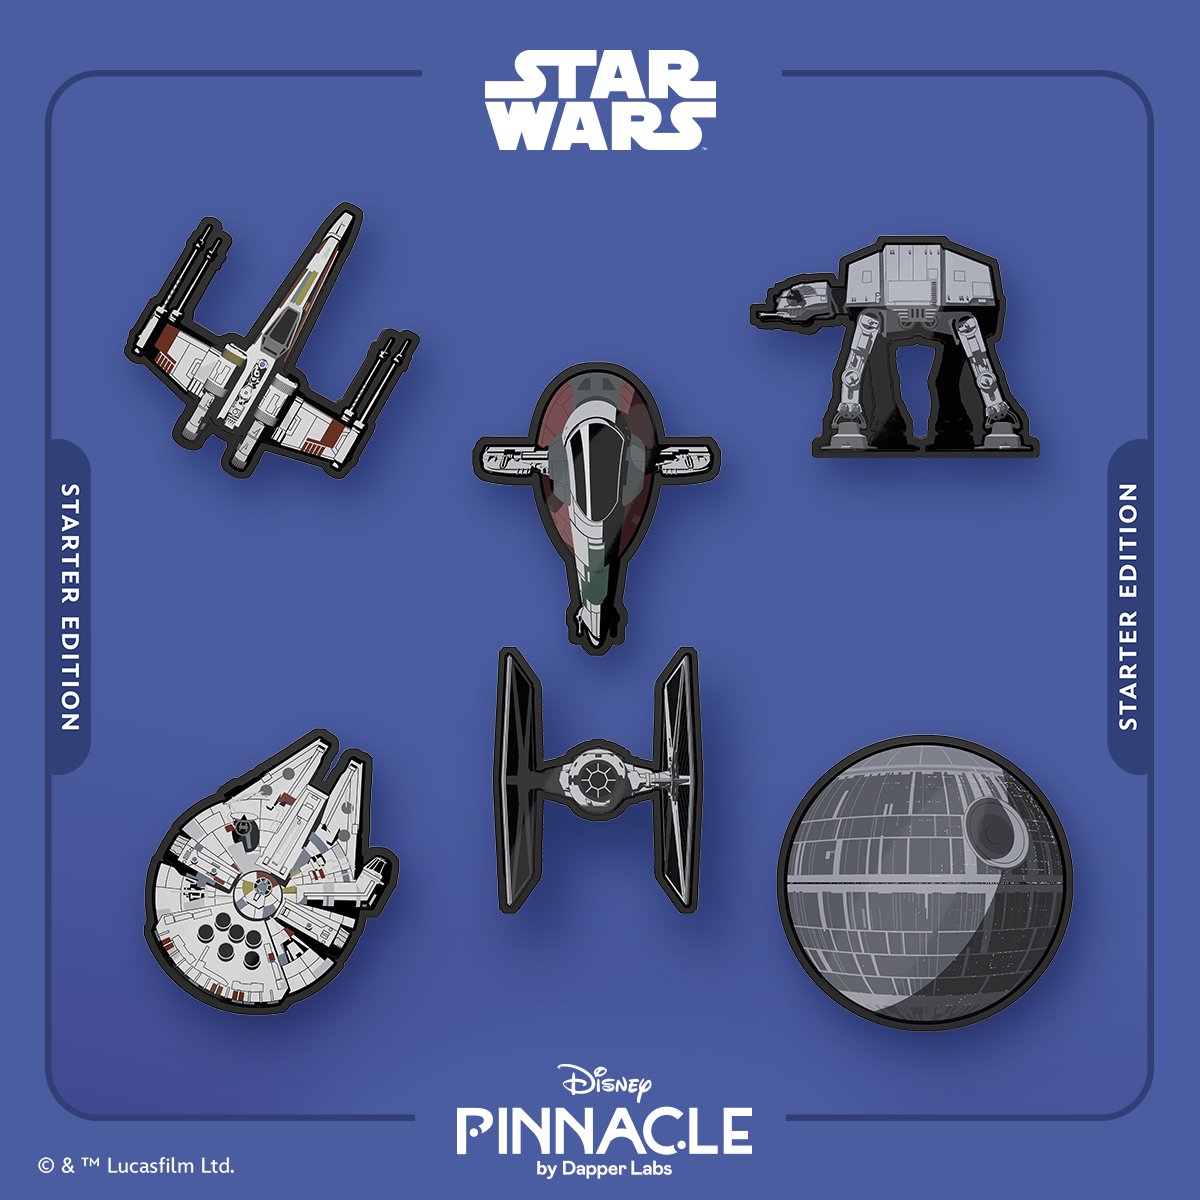 🔥🎉Sweepstakes Alert in Early Access! 🙌 In honor of STAR WARS™ Day, the Villains of the Galaxy Sweepstakes starts NOW! Find out how to enter in the thread below and how the all-new STAR WARS™ featured Starter Edition digital pin set gets you an entry!